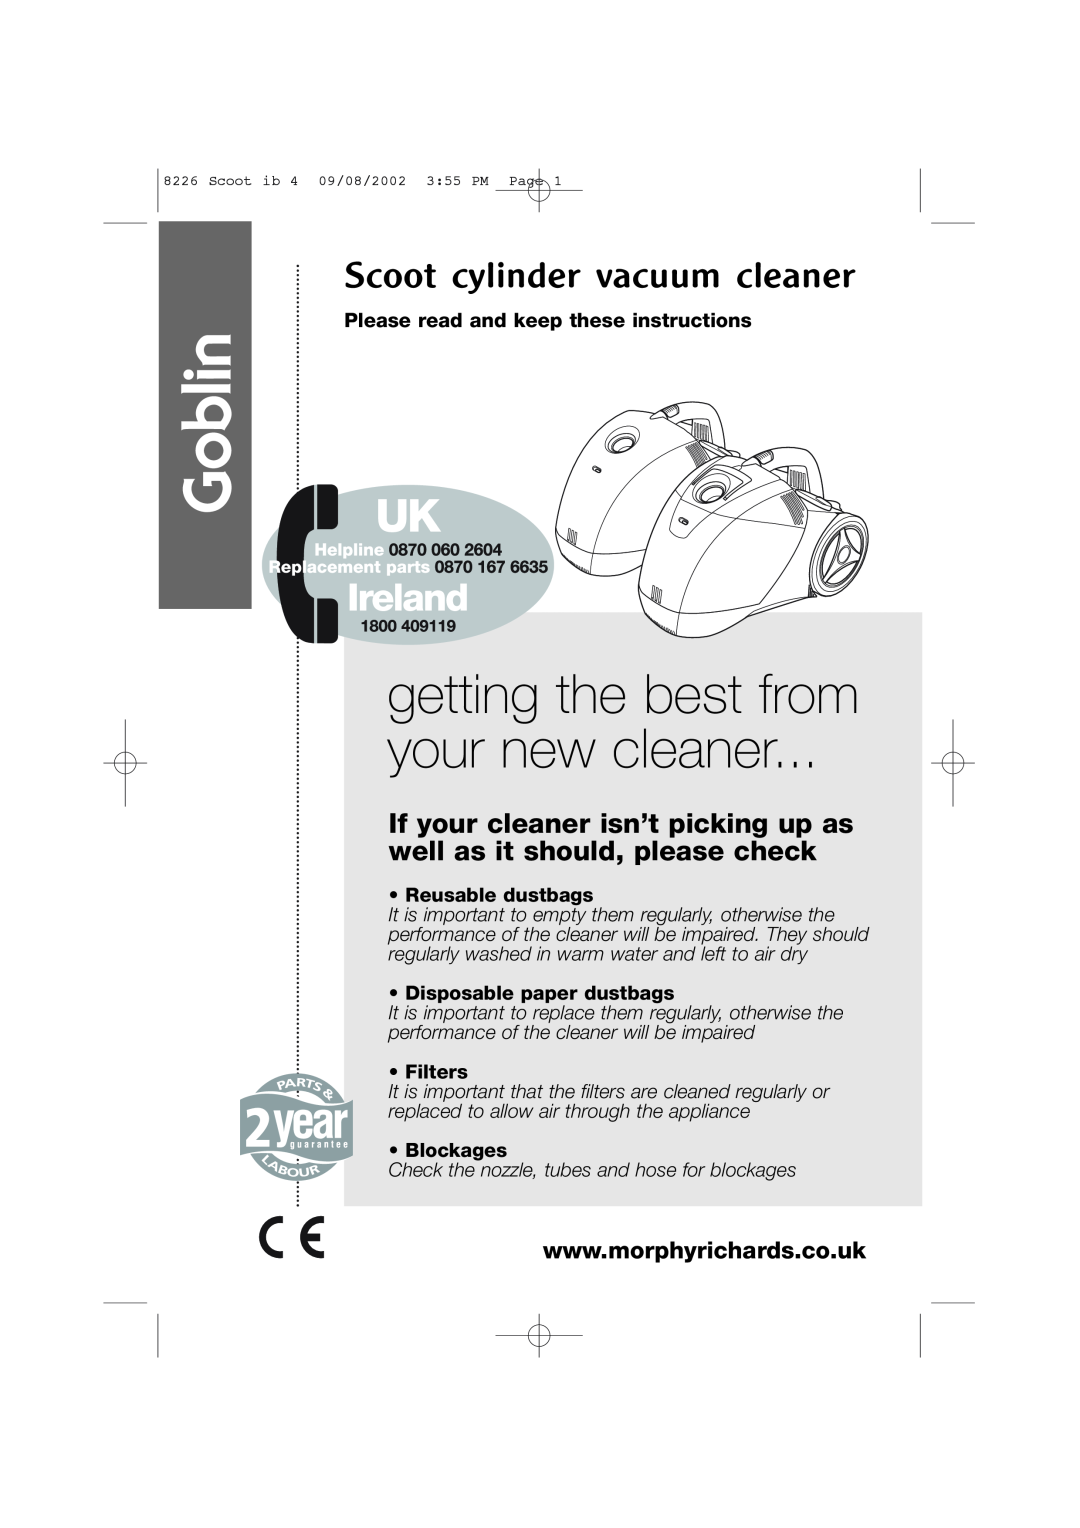 Morphy Richards Scoot cylinder vacuum cleaner manual getting the best from your new cleaner, Reusable dustbags, Filters 